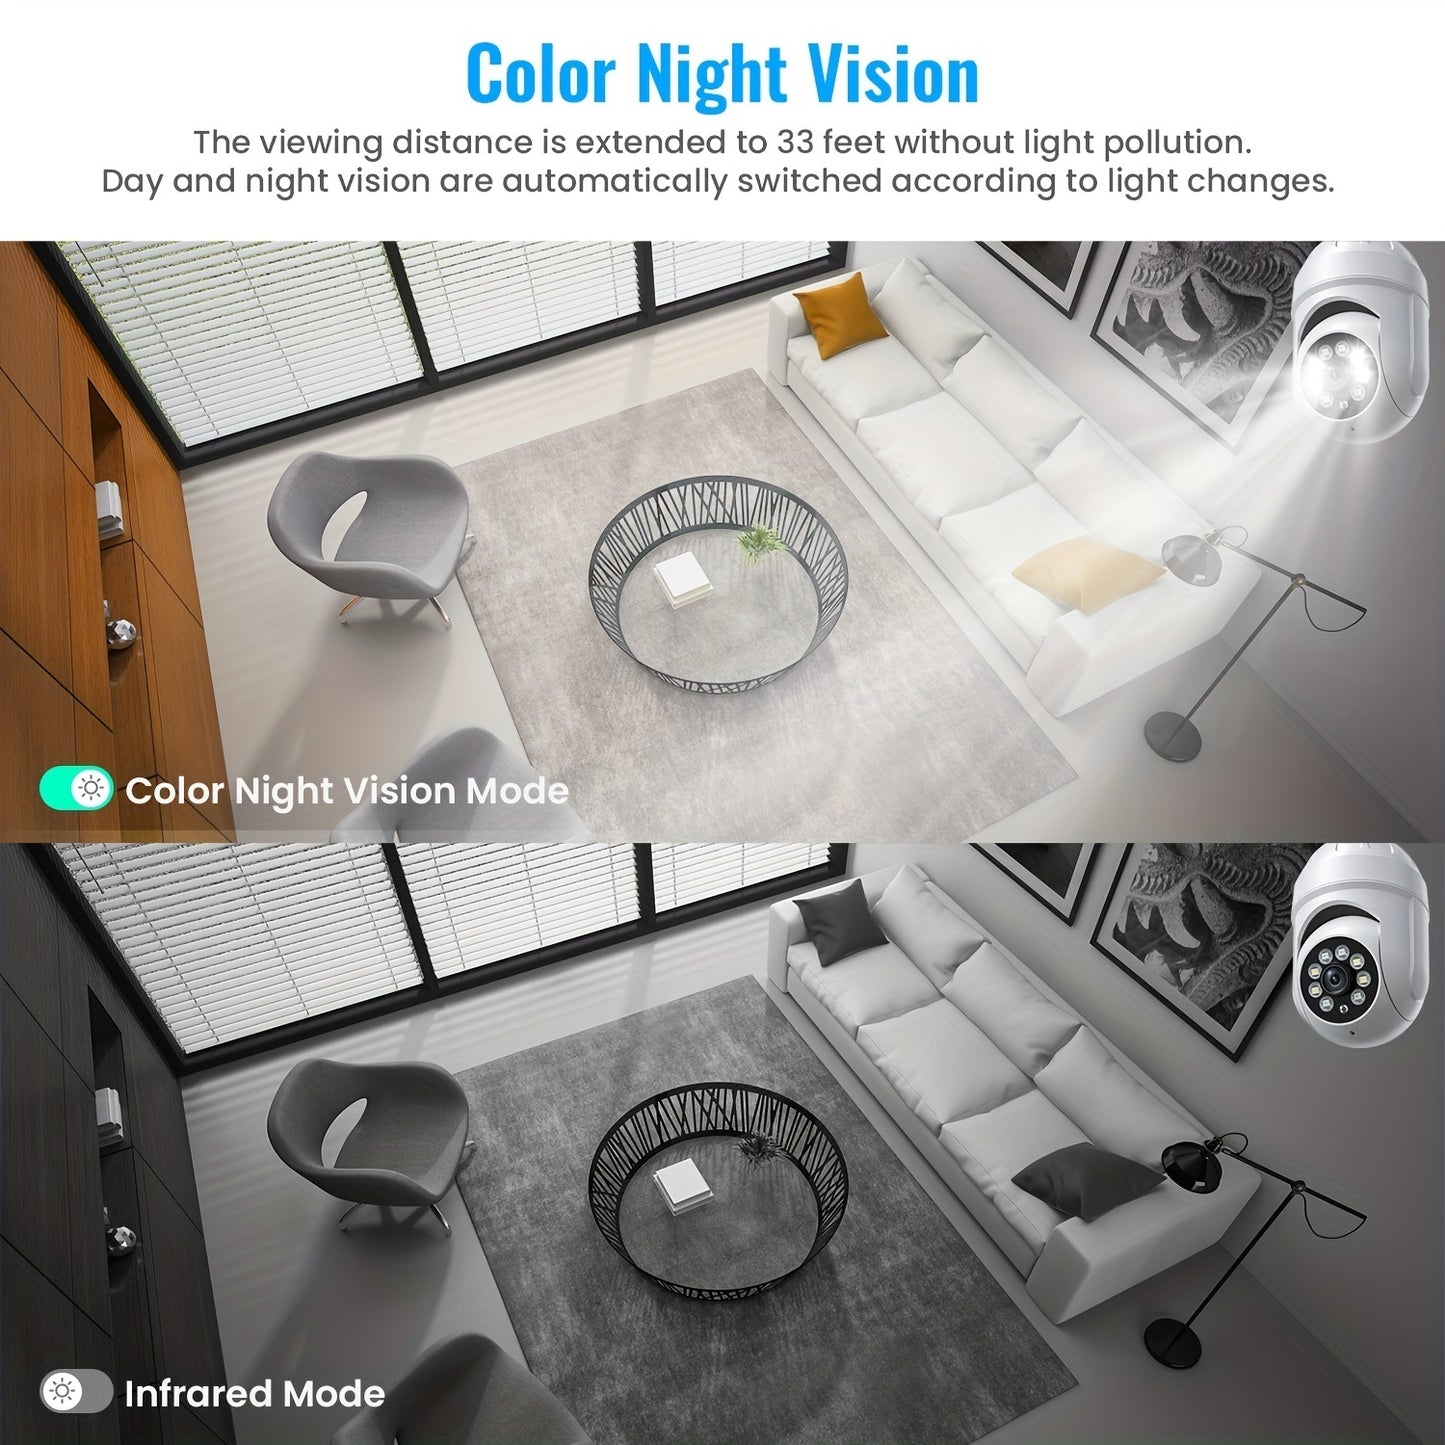 Light Bulb Security Camera, Human Detection And Human Track, Color Night Vision, Instant Alert, 1080P Wireless Wi-Fi Smart Home Security Cameras,